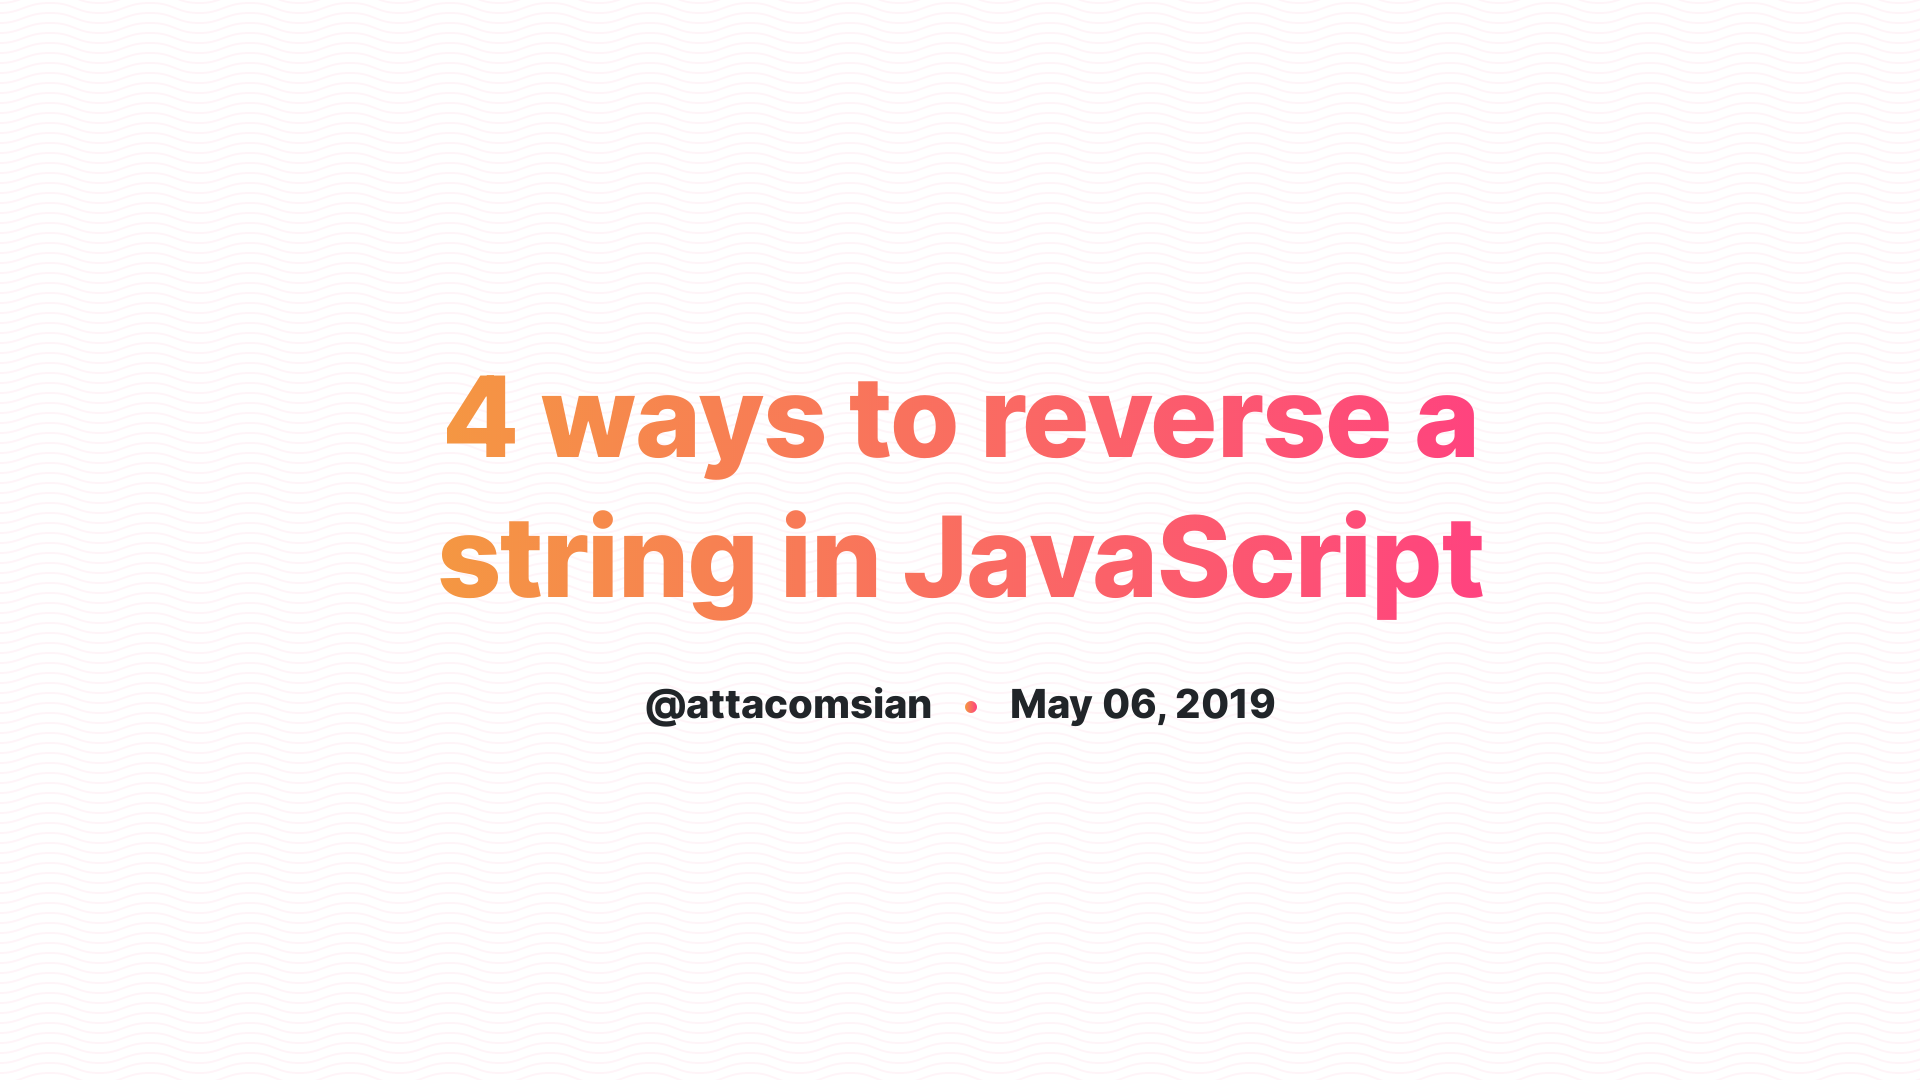 4 ways to reverse a string in JavaScript